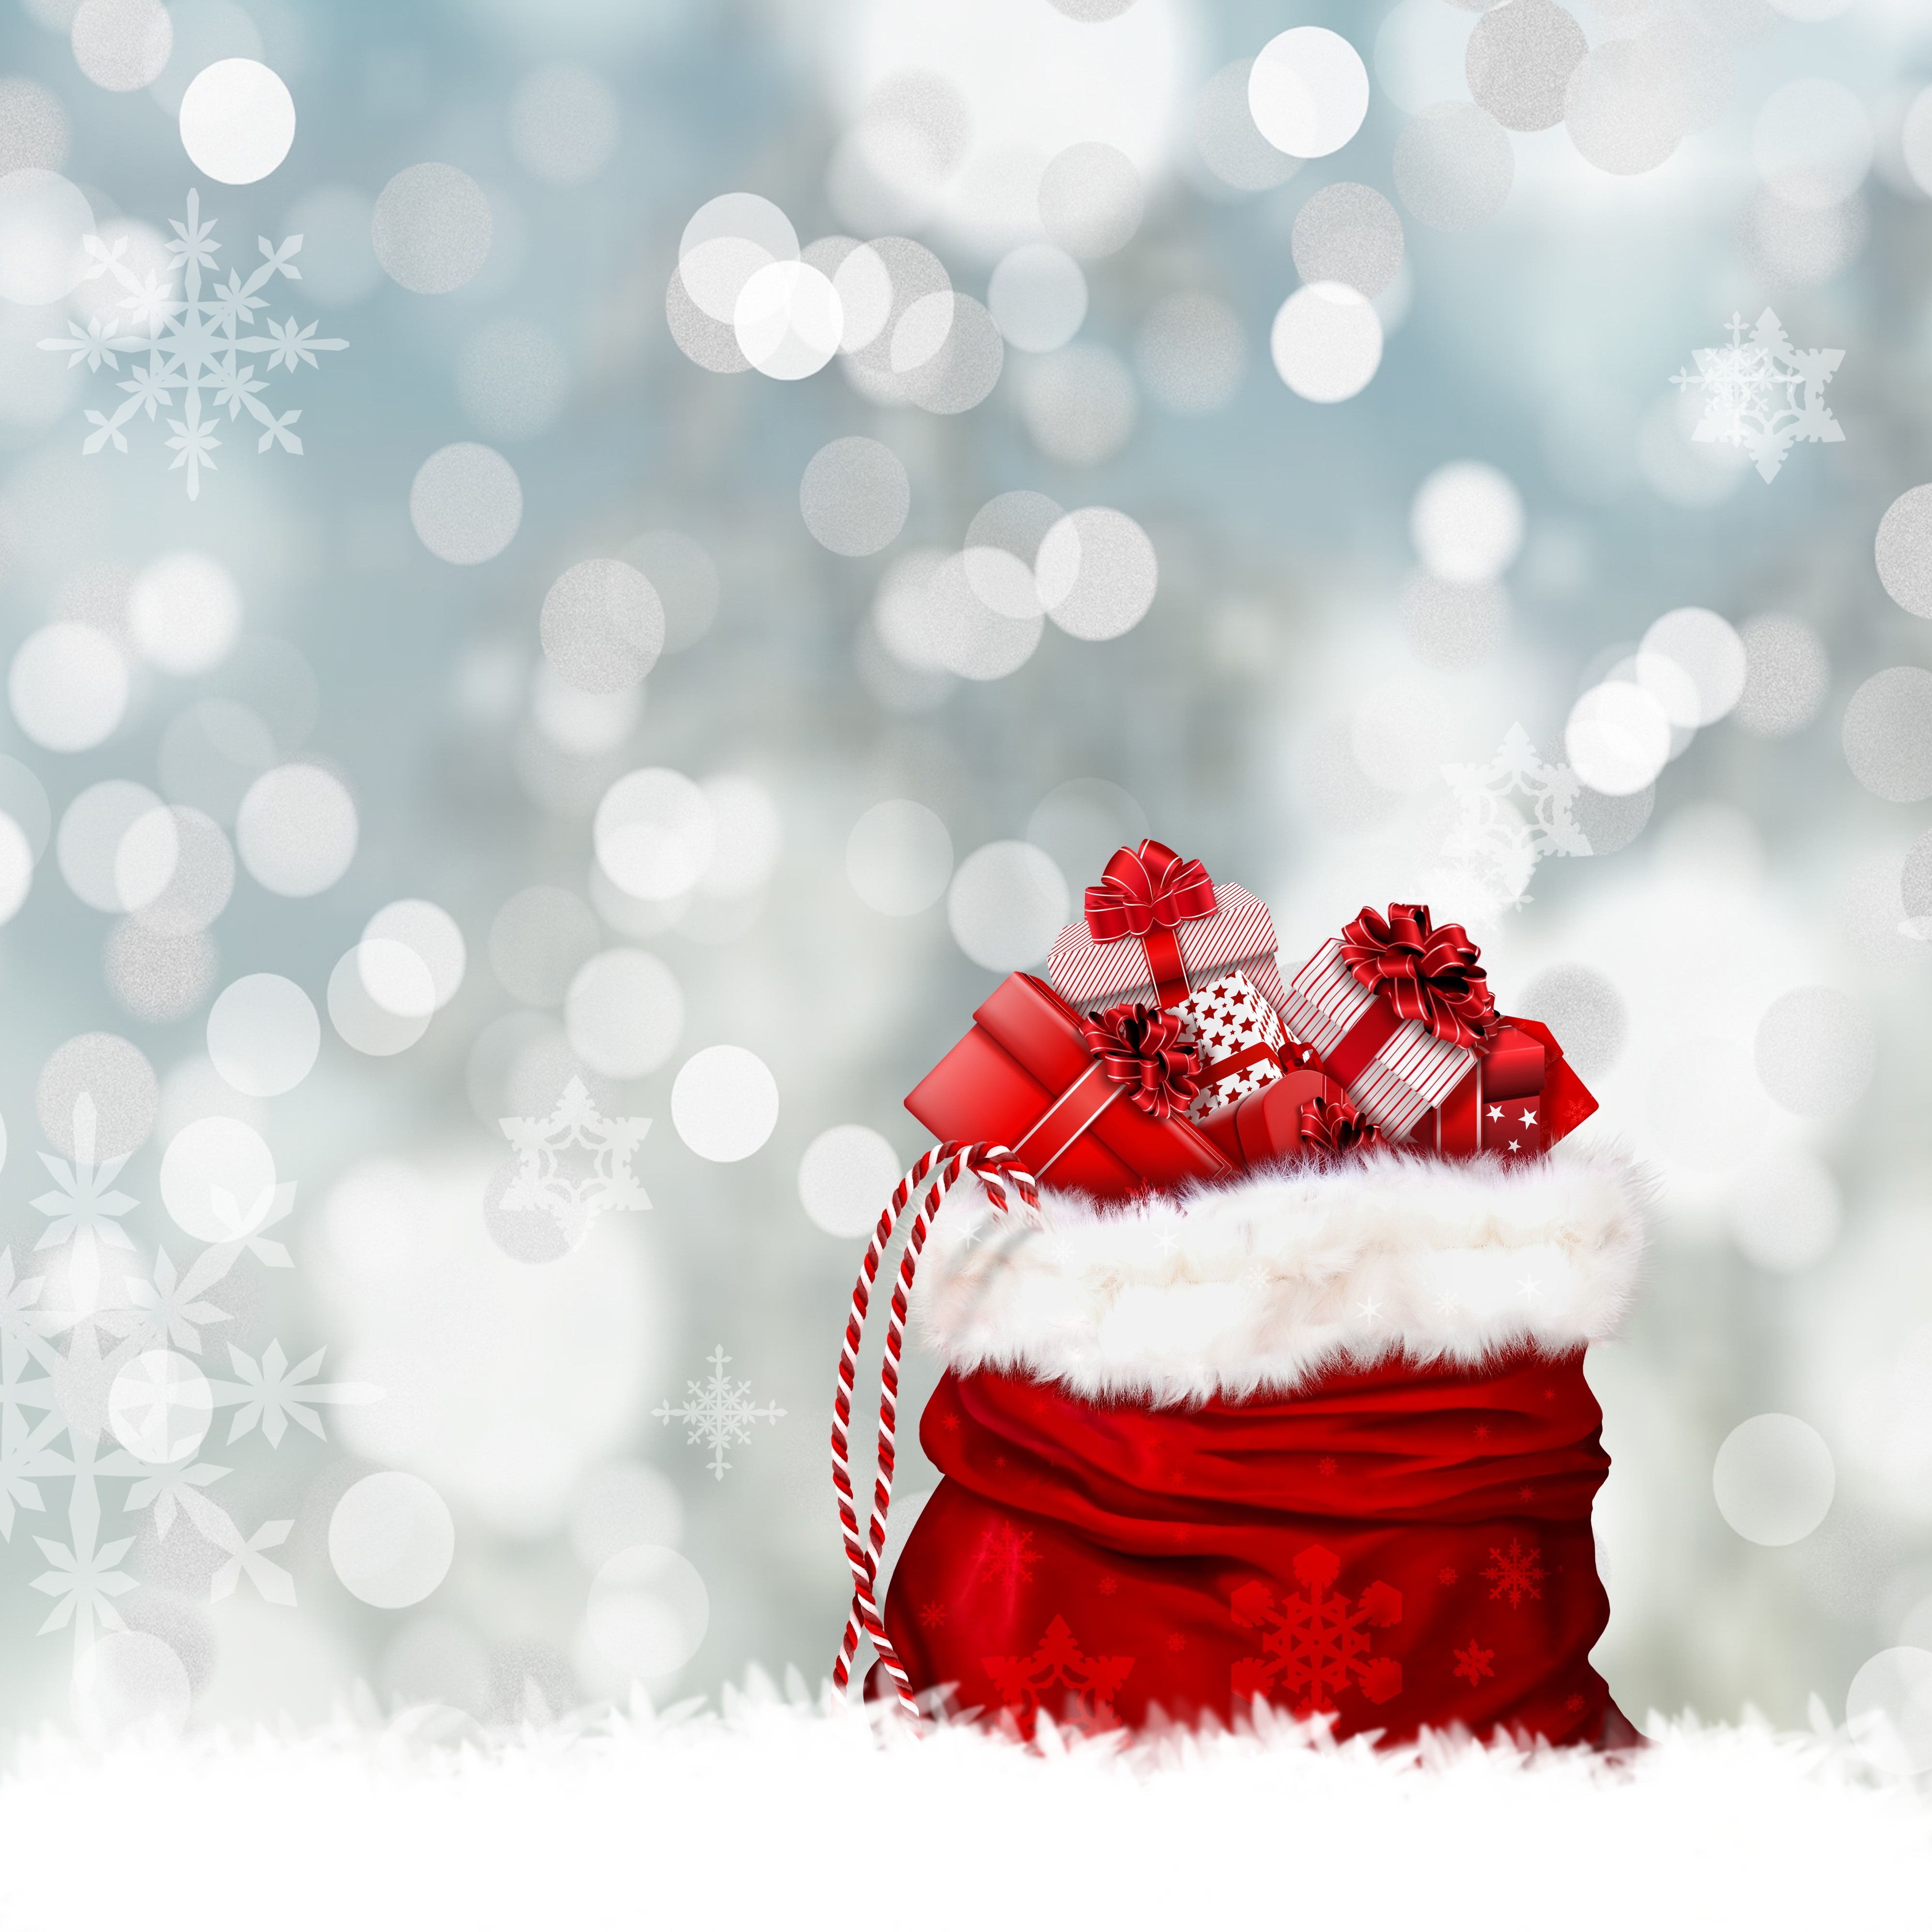 holidays, presents, new year, snowflakes, glare, christmas, gifts Full HD